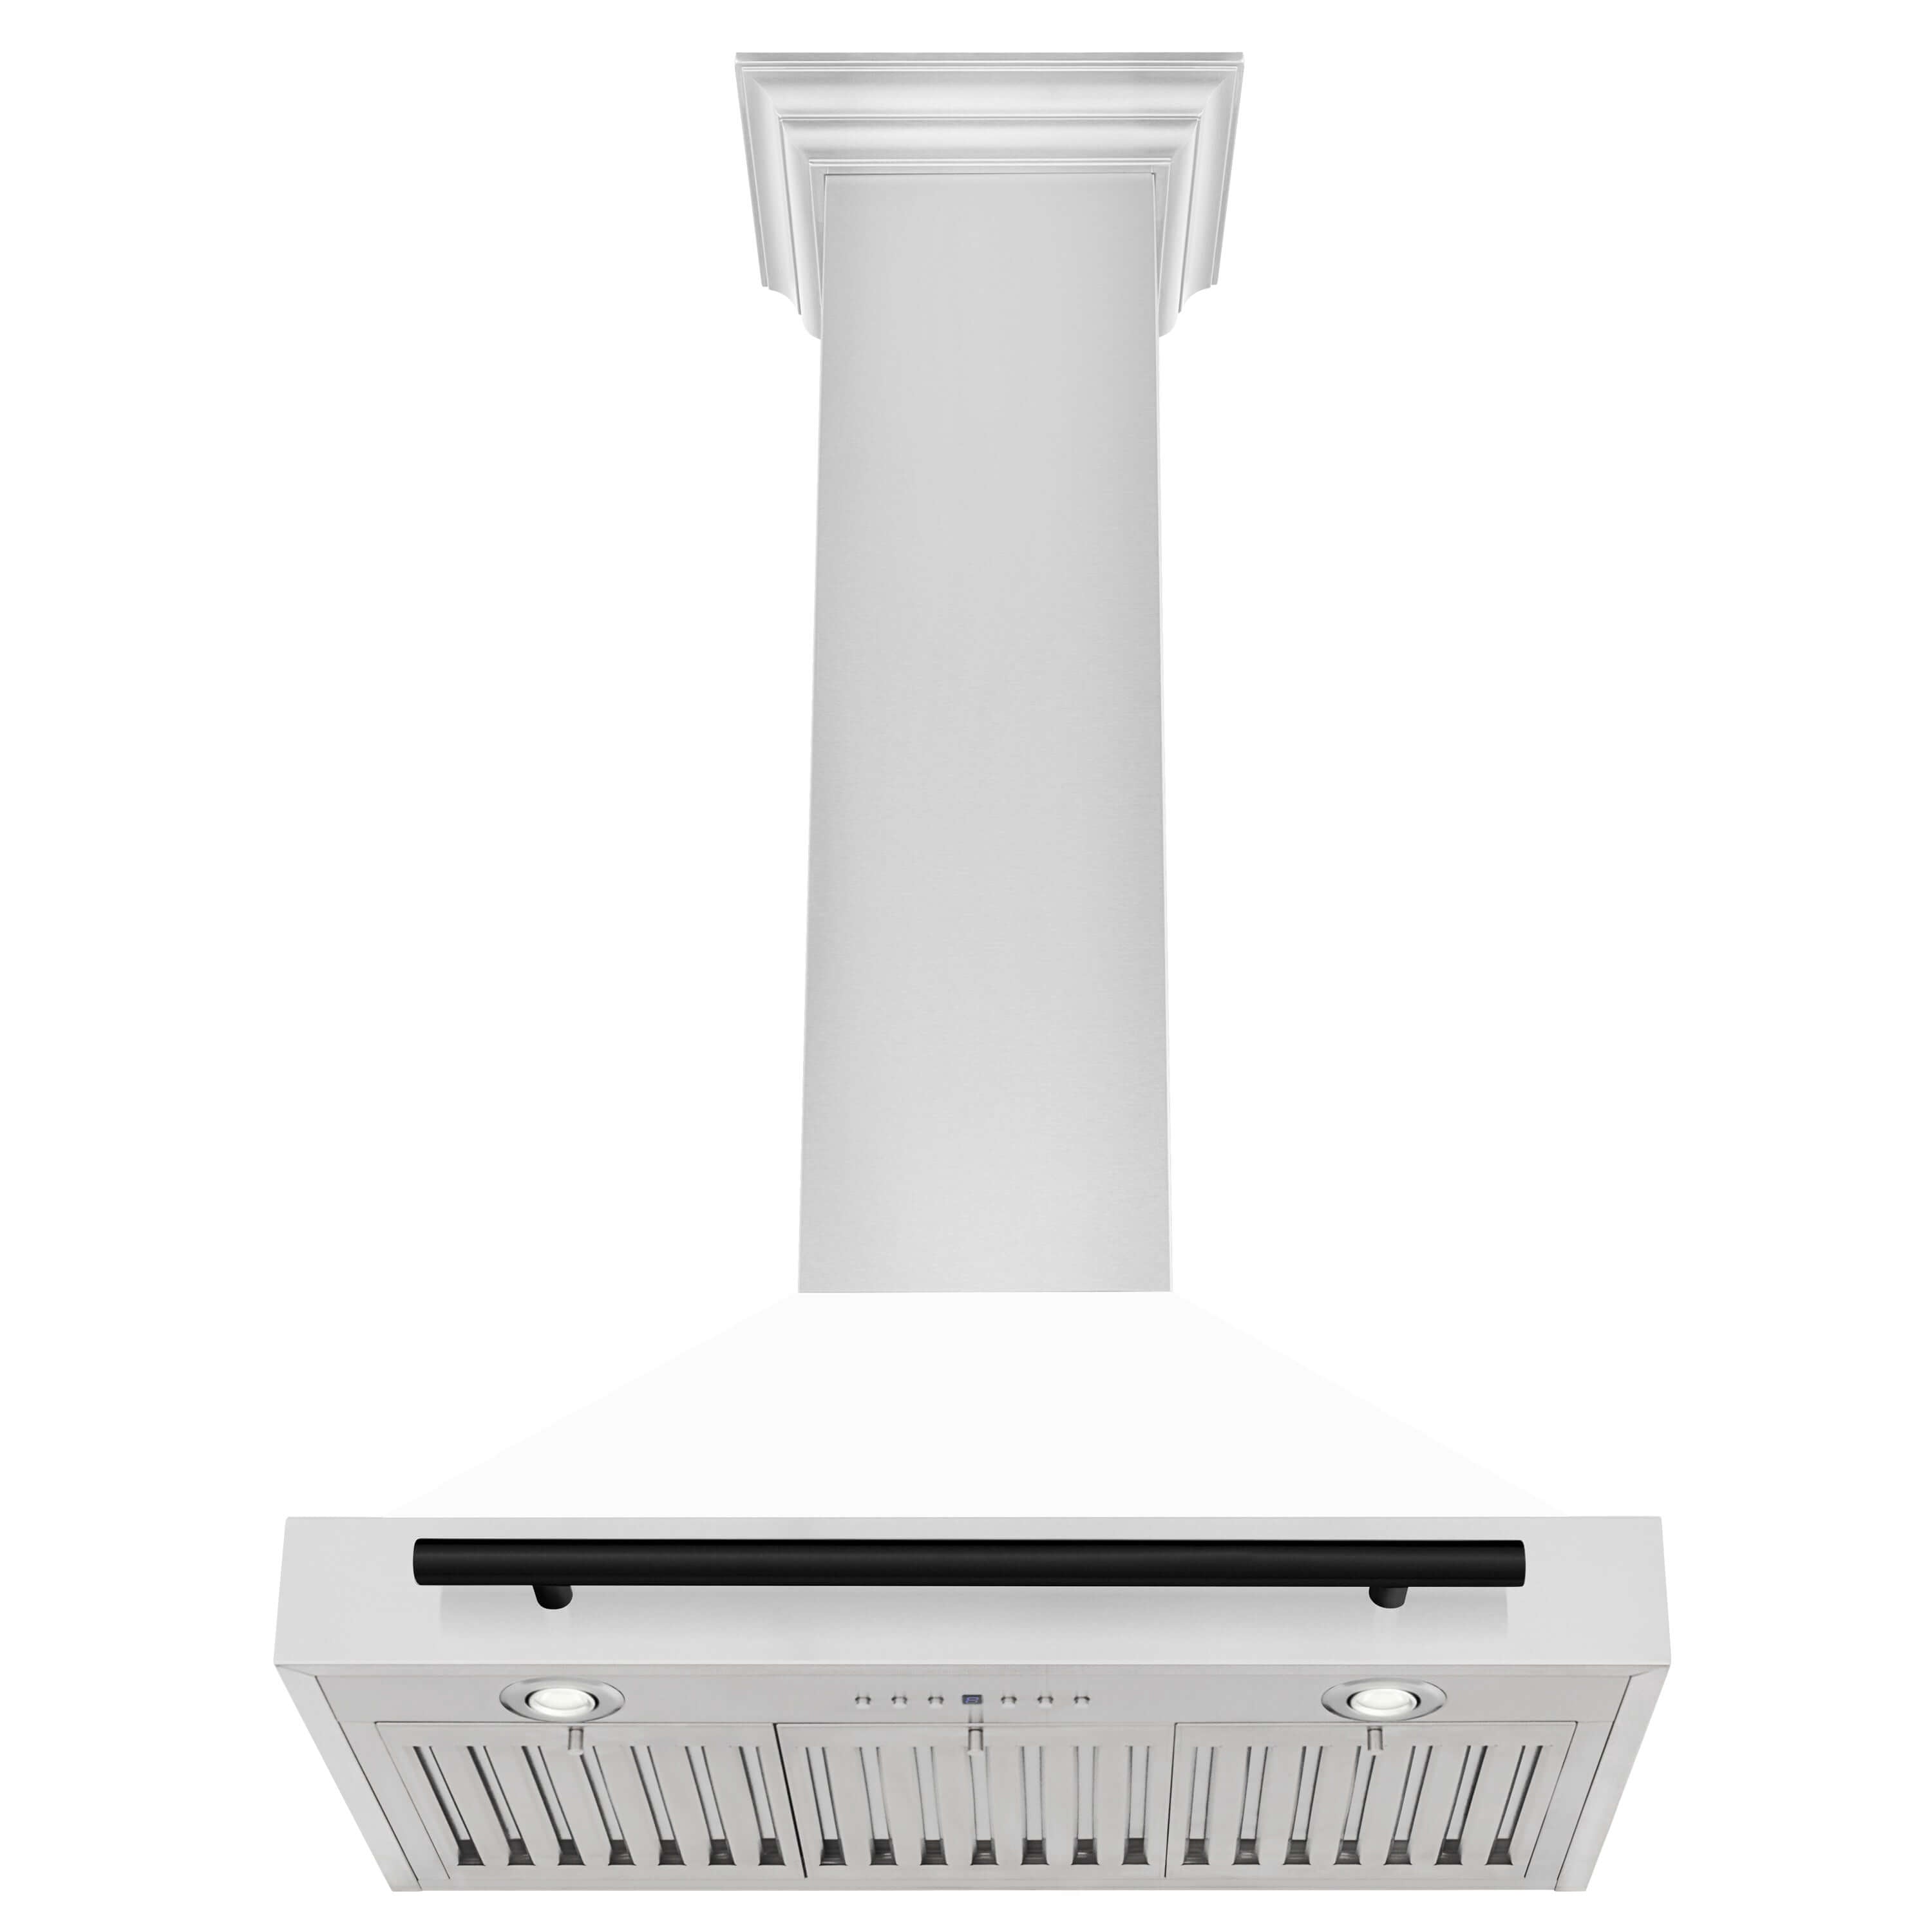 ZLINE Autograph Edition 30 in. Stainless Steel Range Hood with White Matte Shell and Accents (KB4STZ-WM30) front, under.